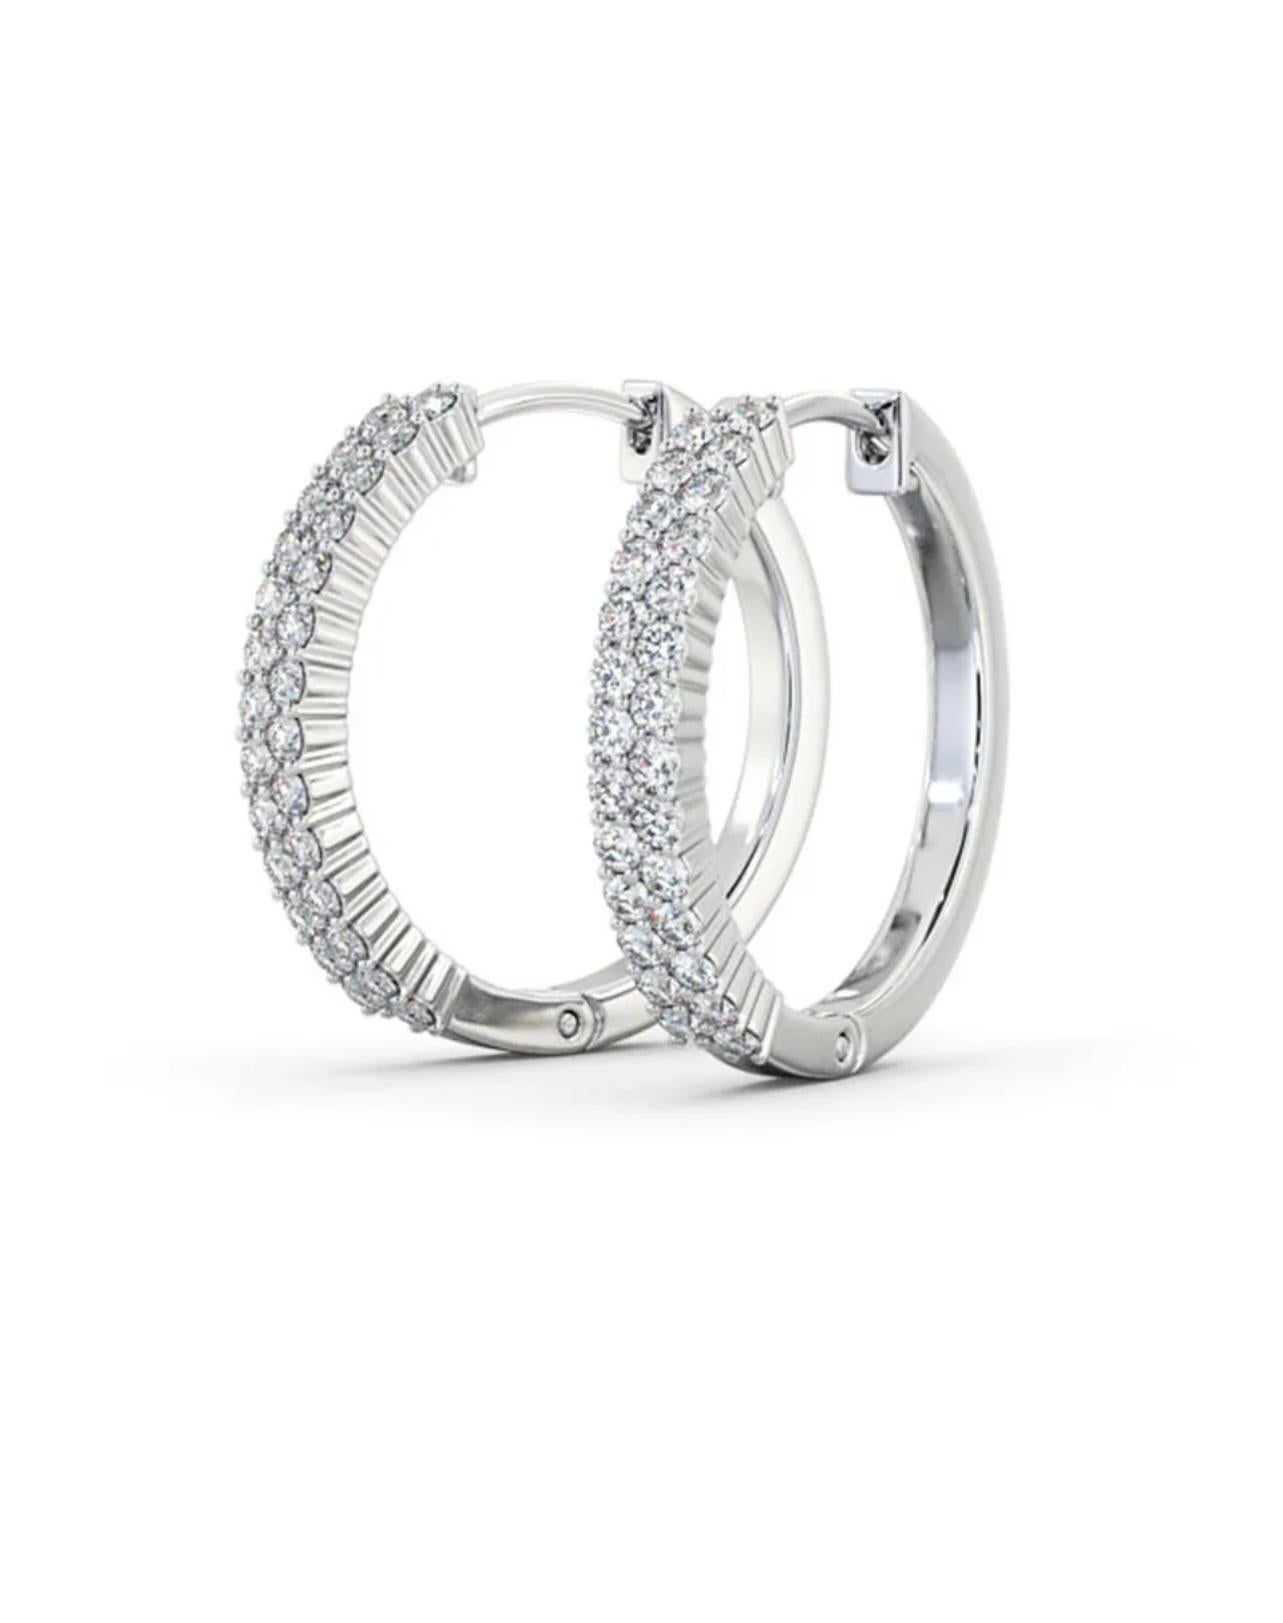 Stunning Diamond Hoops Double Row set

A perfect piece for Anniversary, Birthday or Christmas Gift

18ct White Gold 

Diamond 1ct

G

VS

2cm Diameter

Appox 6g

Two weeks delivery timeframe 